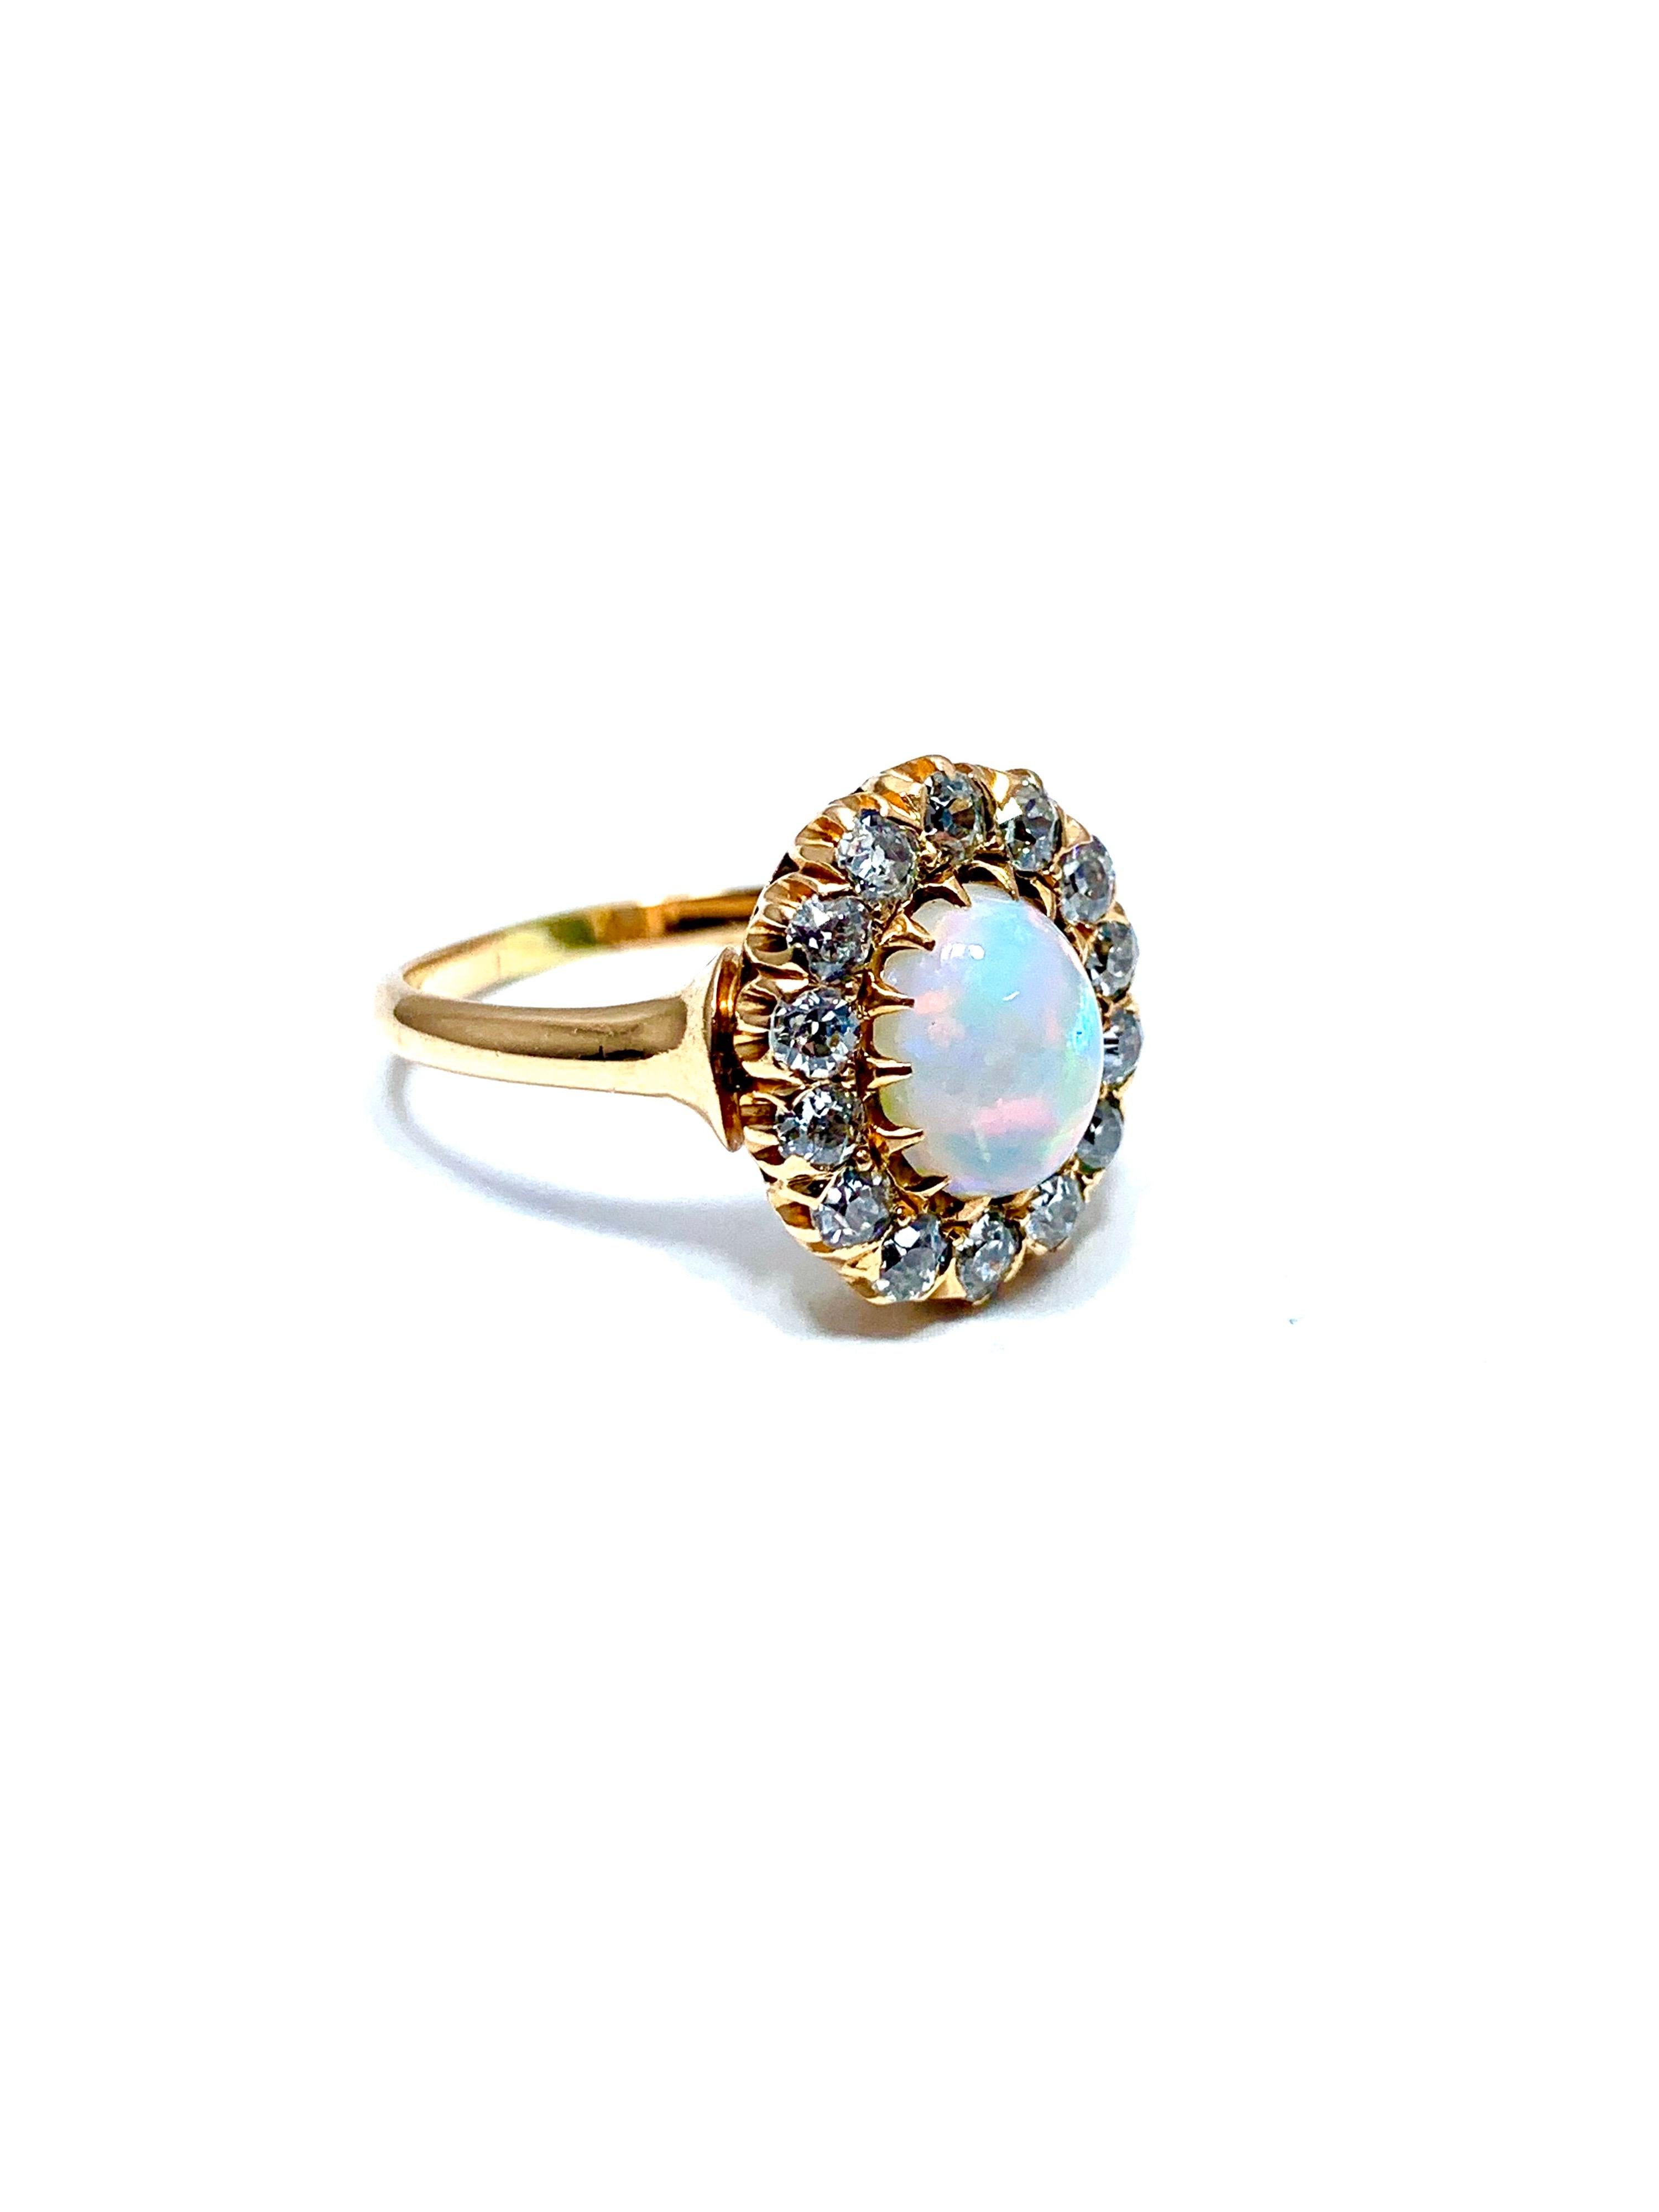 A simply beautiful Art Deco Style cabochon white opal and Diamond 14k rose gold cocktail ring.  The opal is 8.40 x 6.70mm, and displays gorgeous play of color in every color.  the Opal is prong set with a single row of old European cut Diamonds